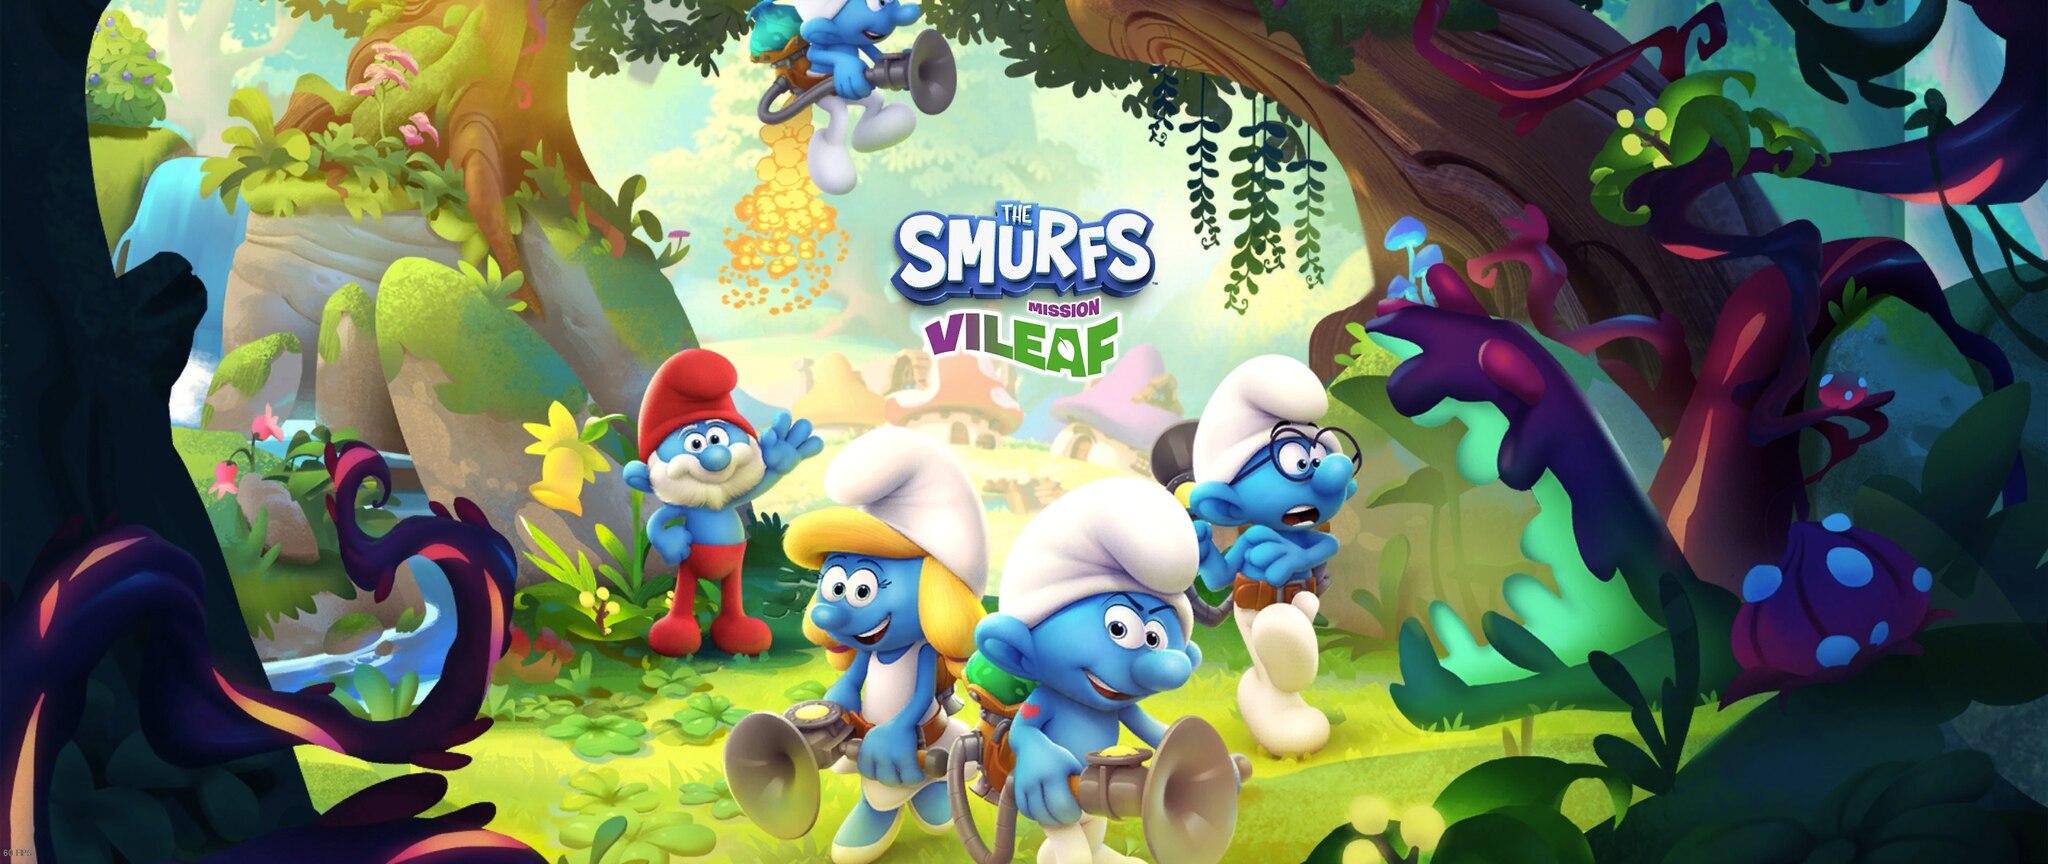 how to play the smurfs - mission vileaf on mac